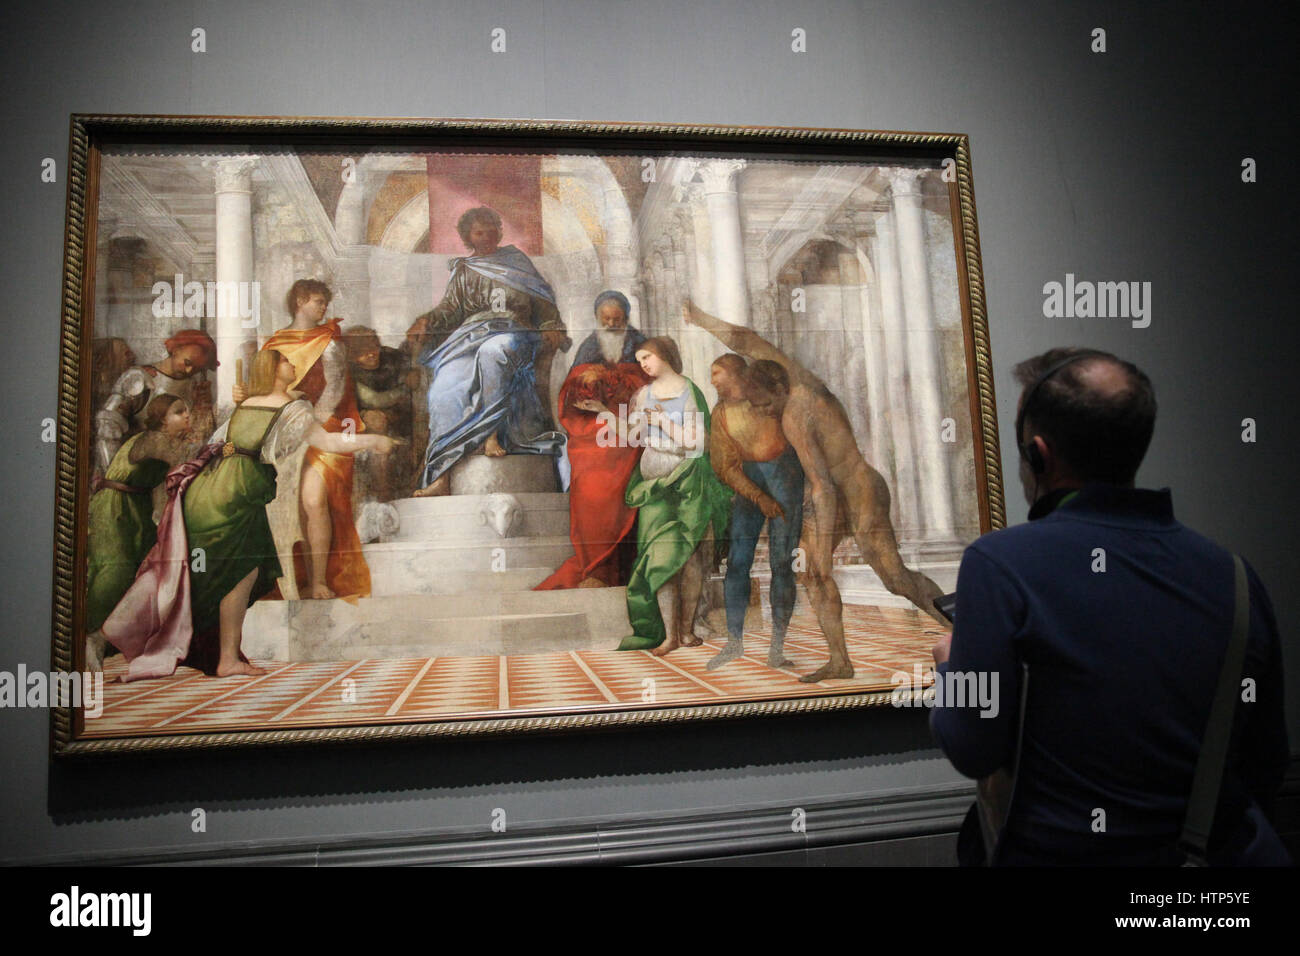 National Gallery, London, UK. 14th Mar, 2017. Sebastiano del Piombo - The Judgement of Solomon about 1506-1509. The National Gallery presents the first ever exhibition devoted to the creative partnership between Michelangelo (1475-1564) and Sebastian del Piombo (1485-1547). The exhibition runs from 15 March to 25 June 2017 Credit: Dinendra Haria/Alamy Live News Stock Photo